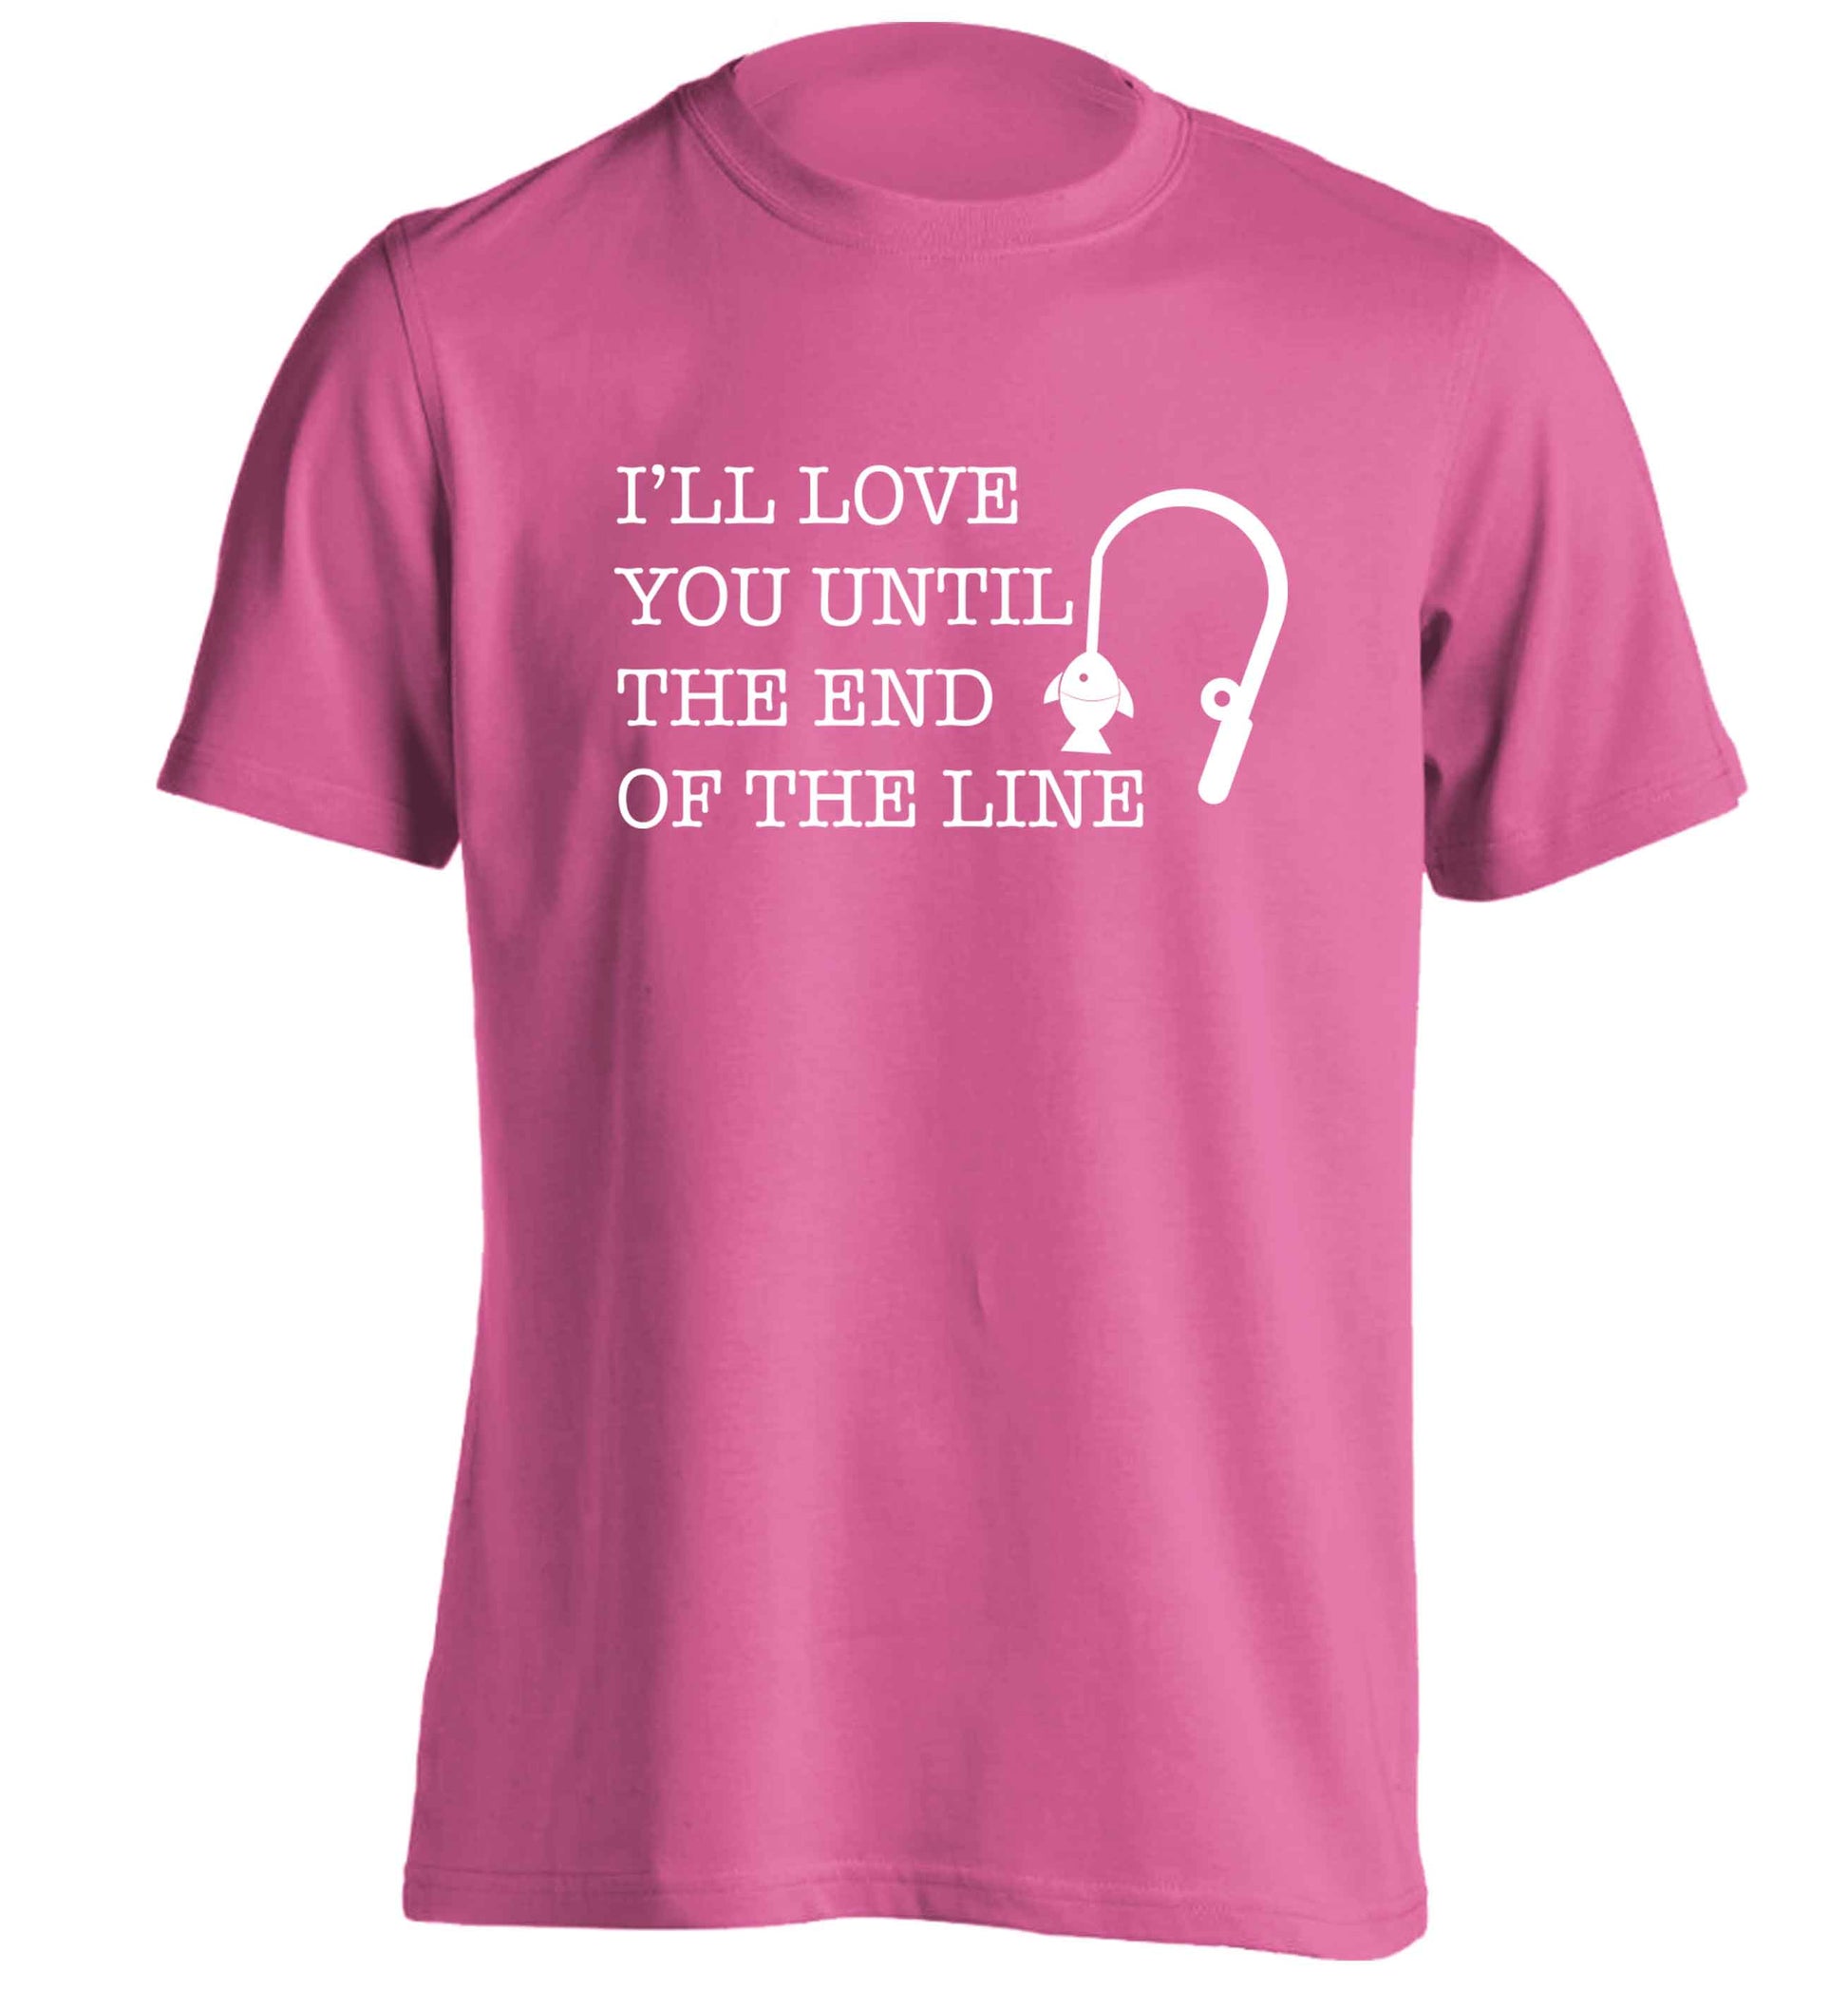 I'll love you until the end of the line adults unisex pink Tshirt 2XL